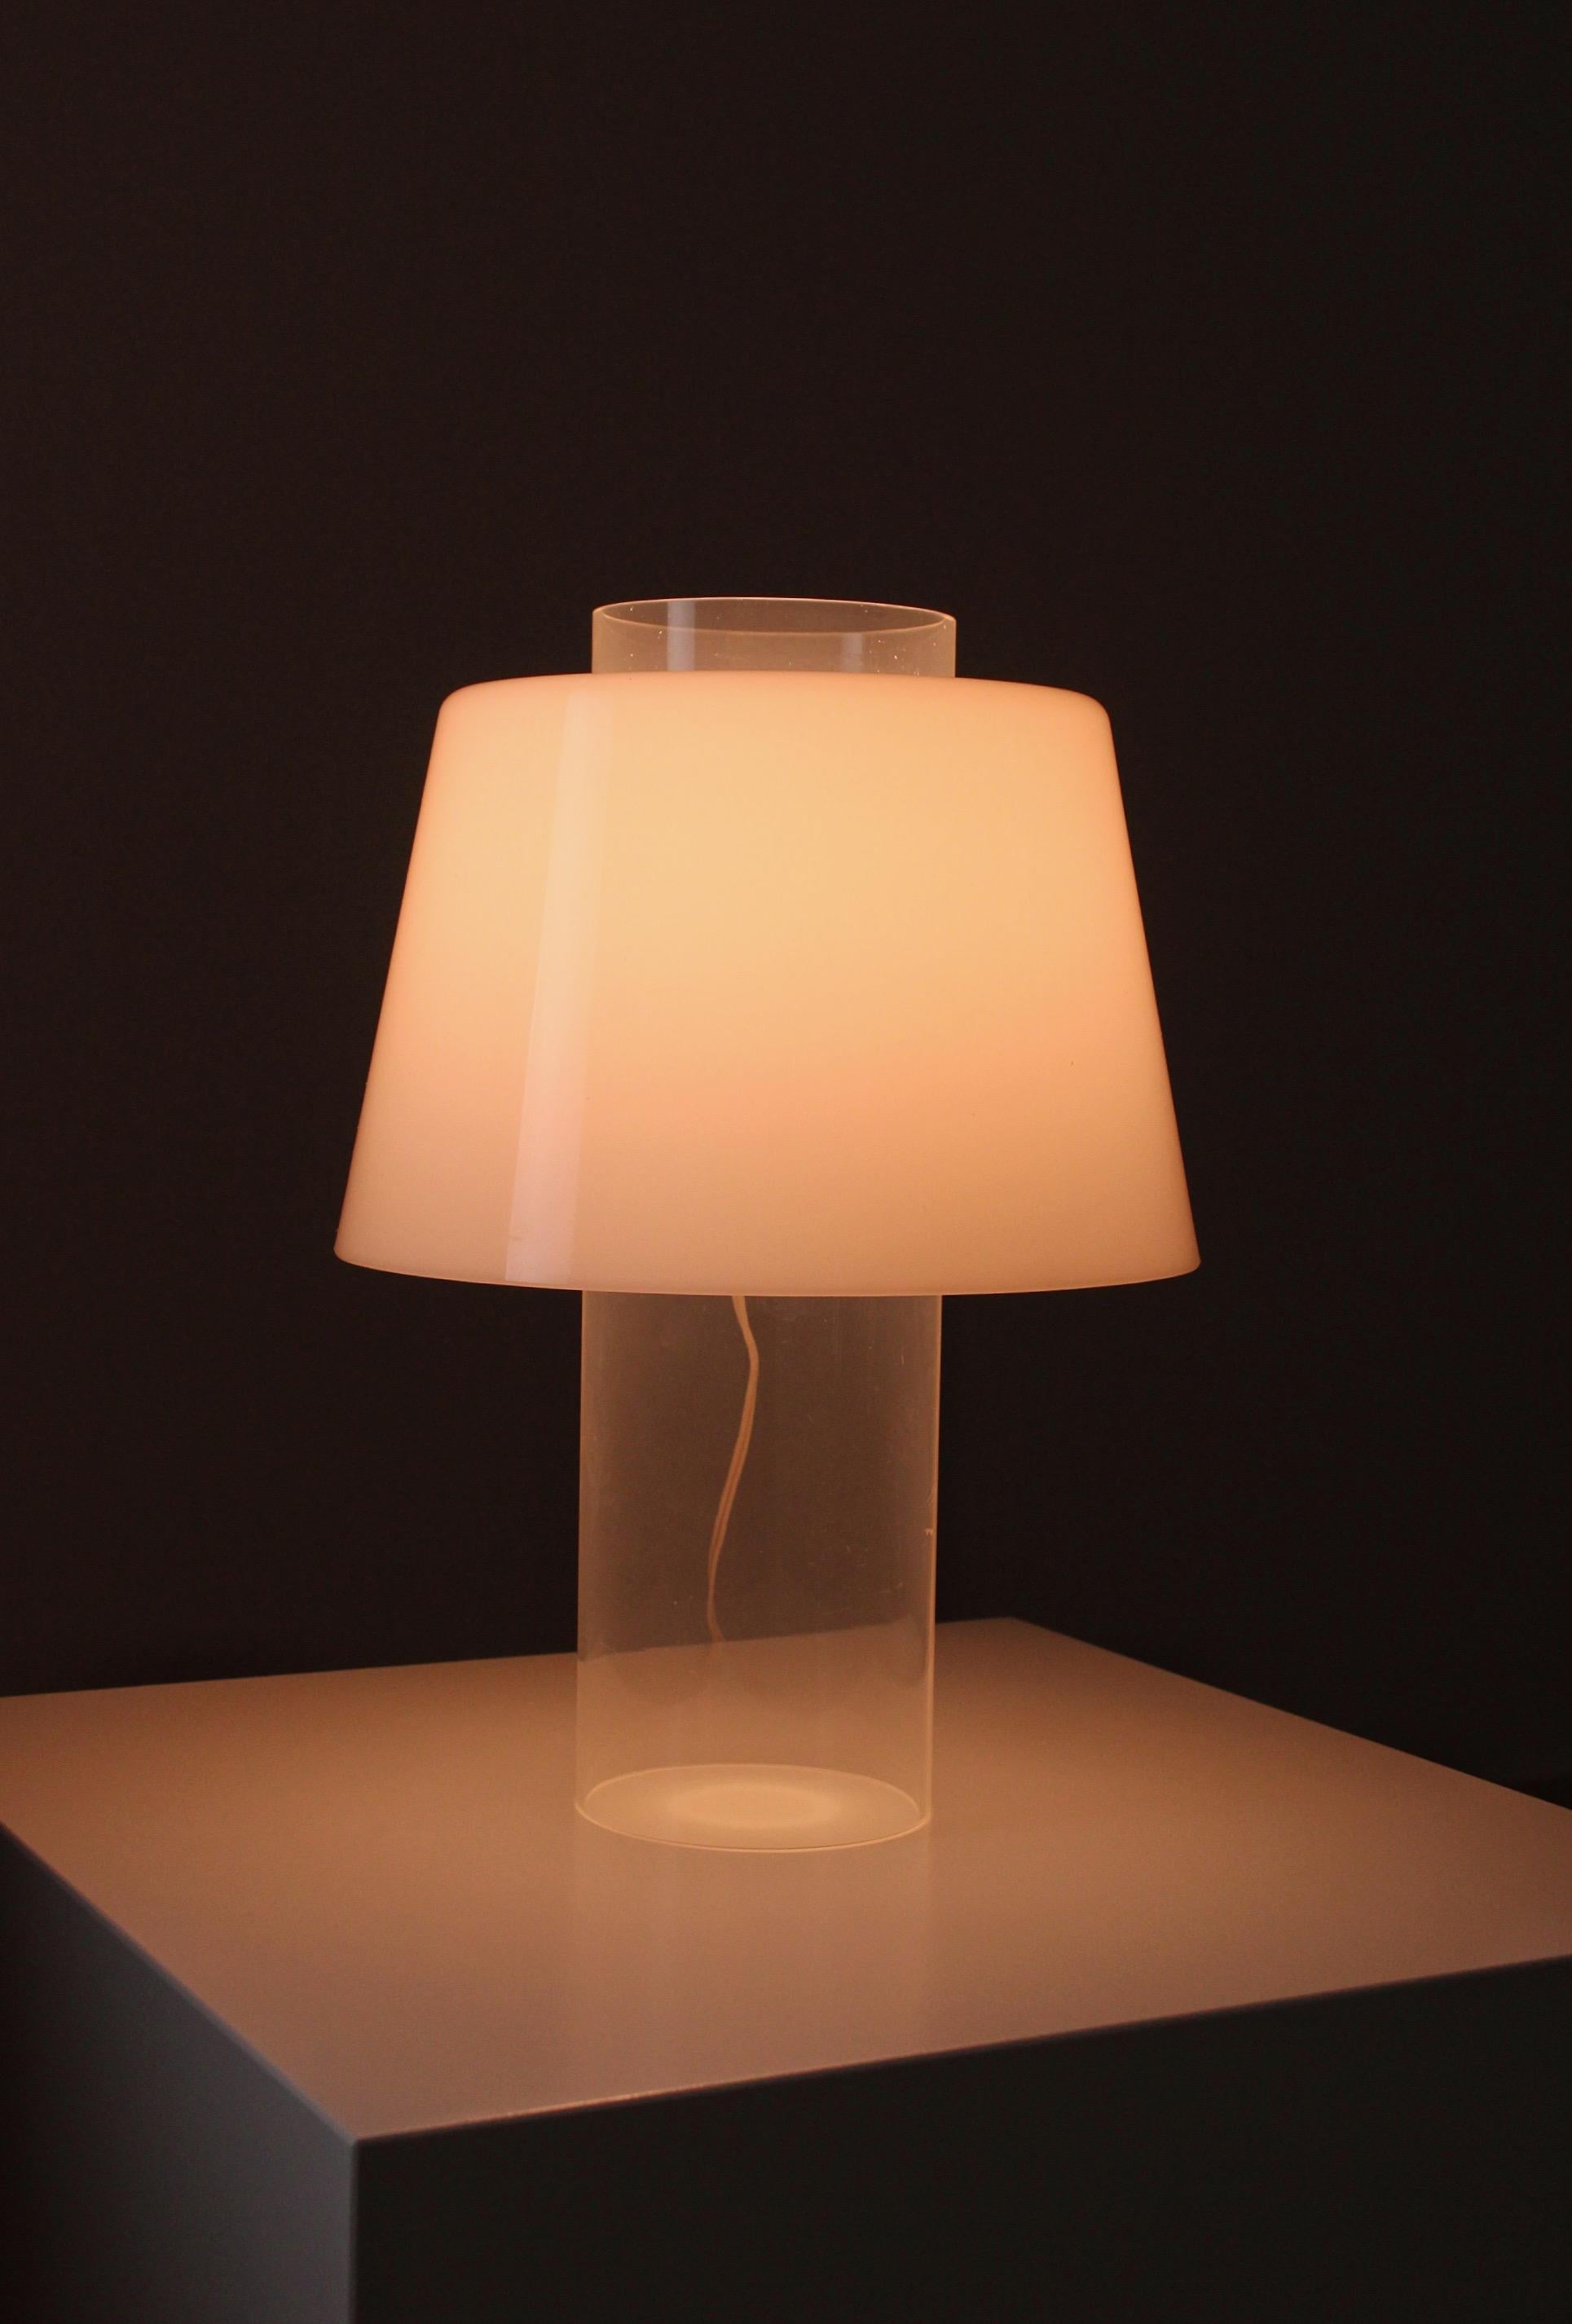 Modern Art table lamp by Yki Nummi for Stockmann-Orno, 1955 For Sale 1